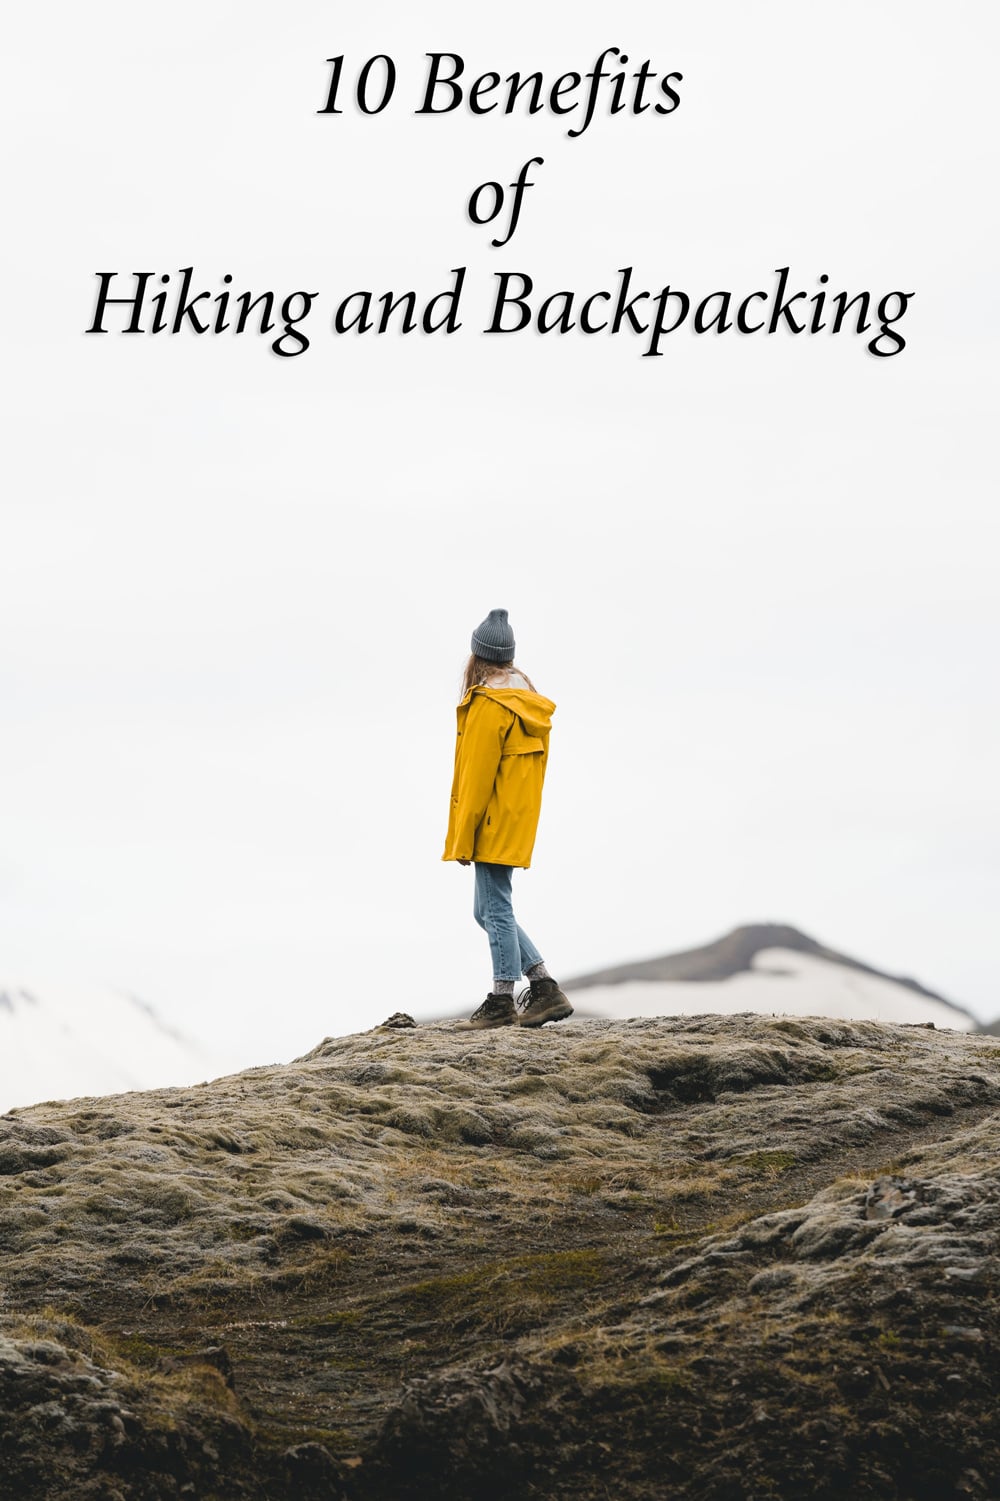 10 benefits of hiking and backpacking  Pinterest pin with female hiker on mountain wearing yellow jacket